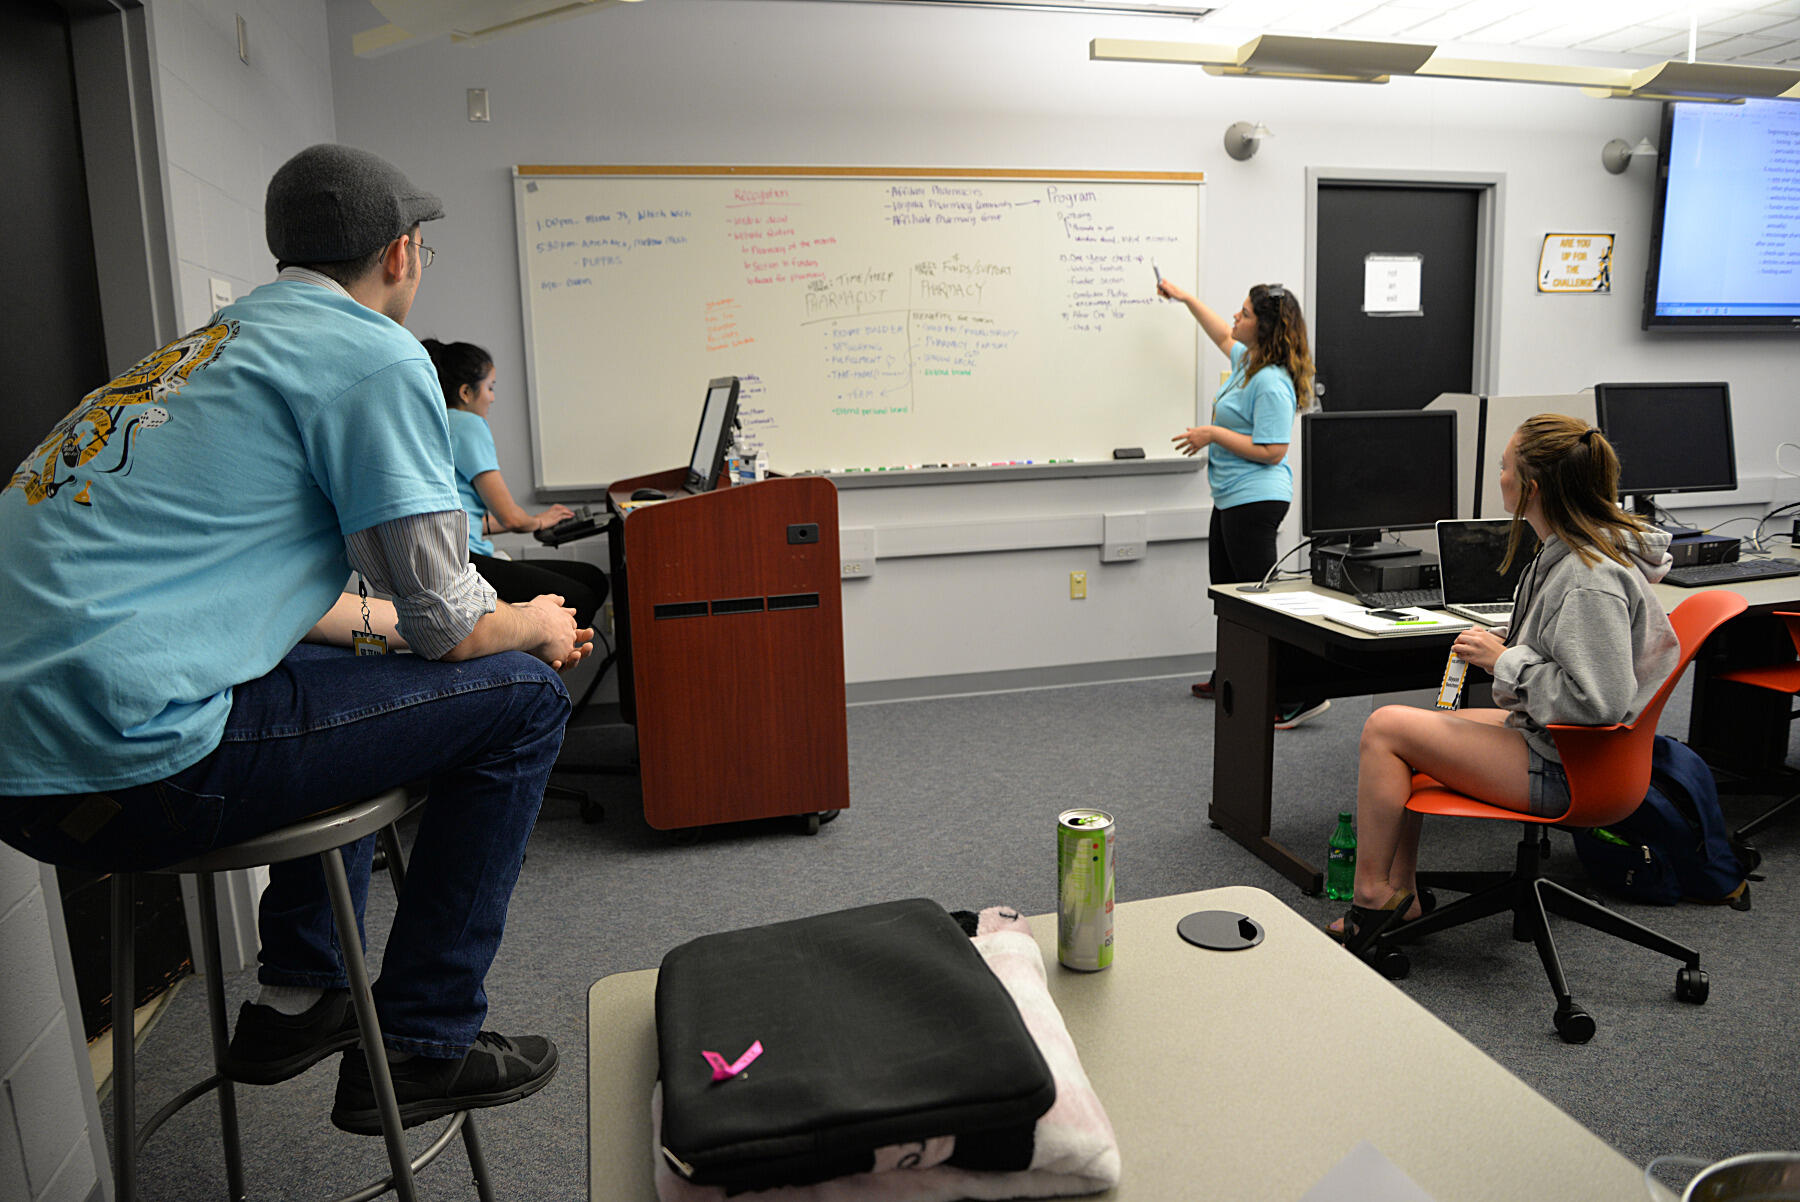 On Thursday, a team of VCU students working on behalf of the nonprofit RxPartnership brainstormed ideas to develop new marketing material for the organization.